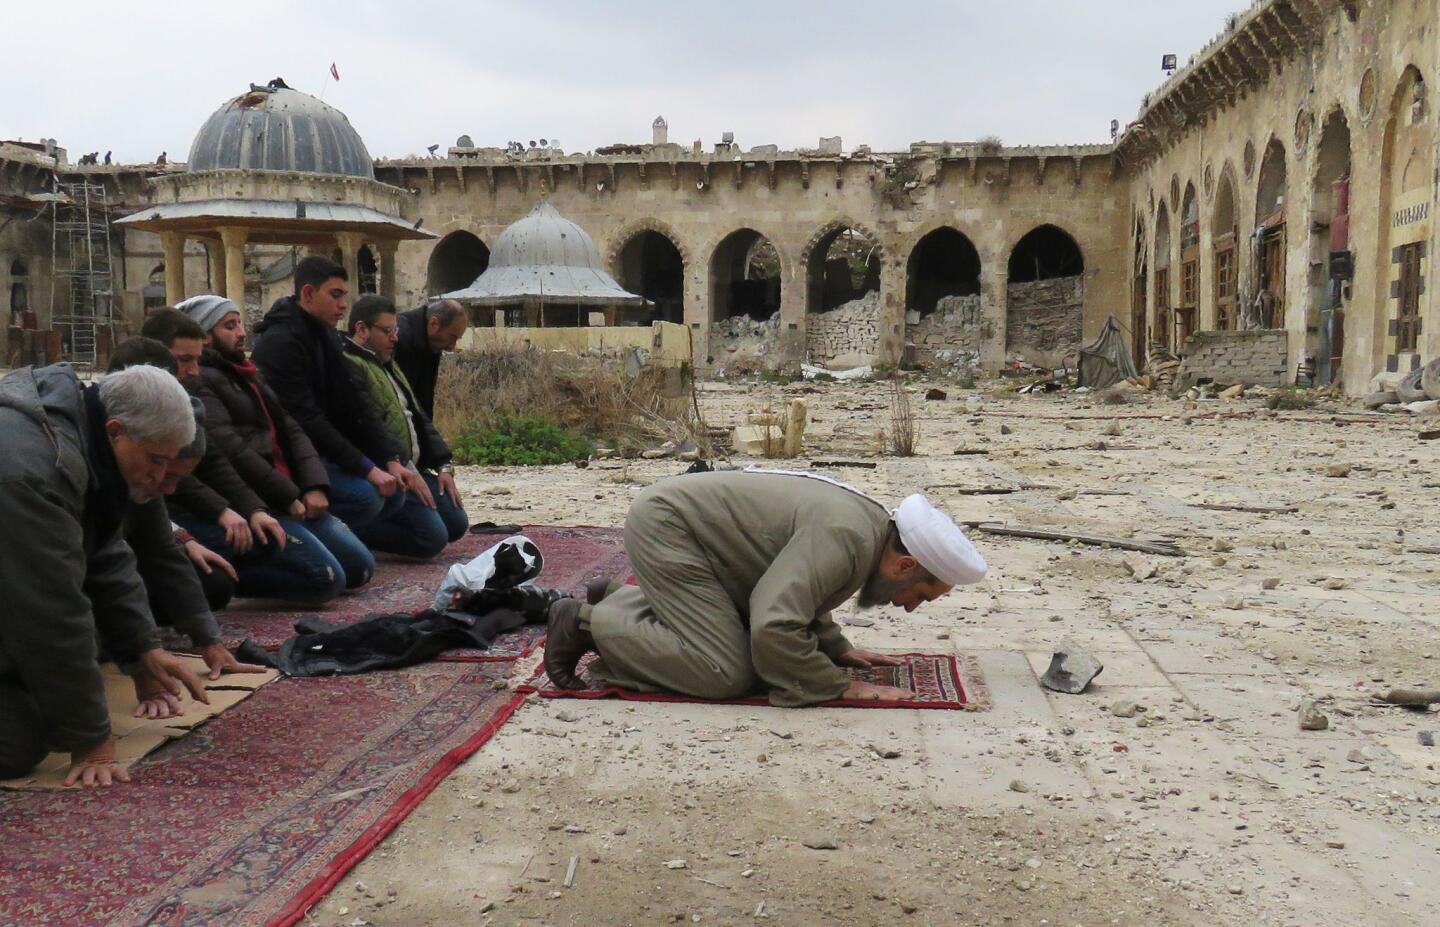 Syrians pray in the ancient Umayyad mosque in the old city of Aleppo, as civilians are allowed access to some neighbourhoods recently retaken by Syrian government forces.